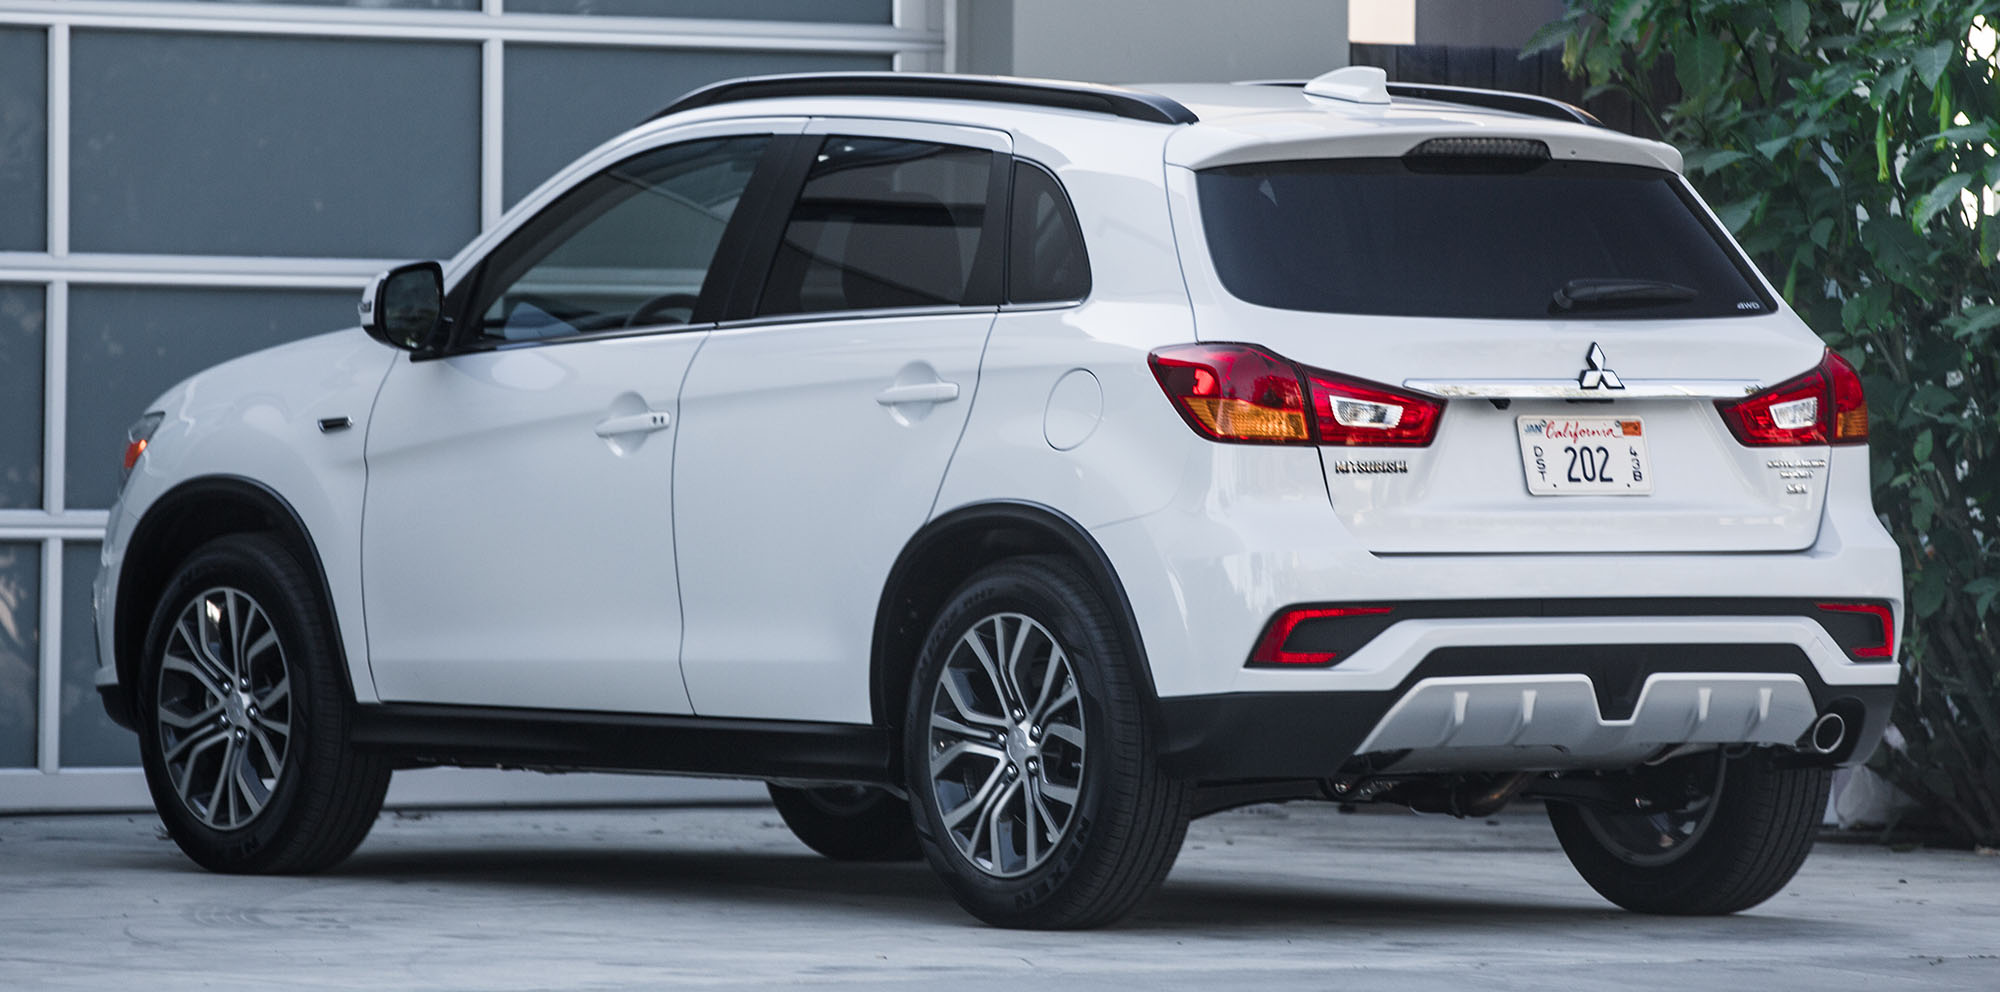 2018 Mitsubishi ASX update revealed in the USA photos